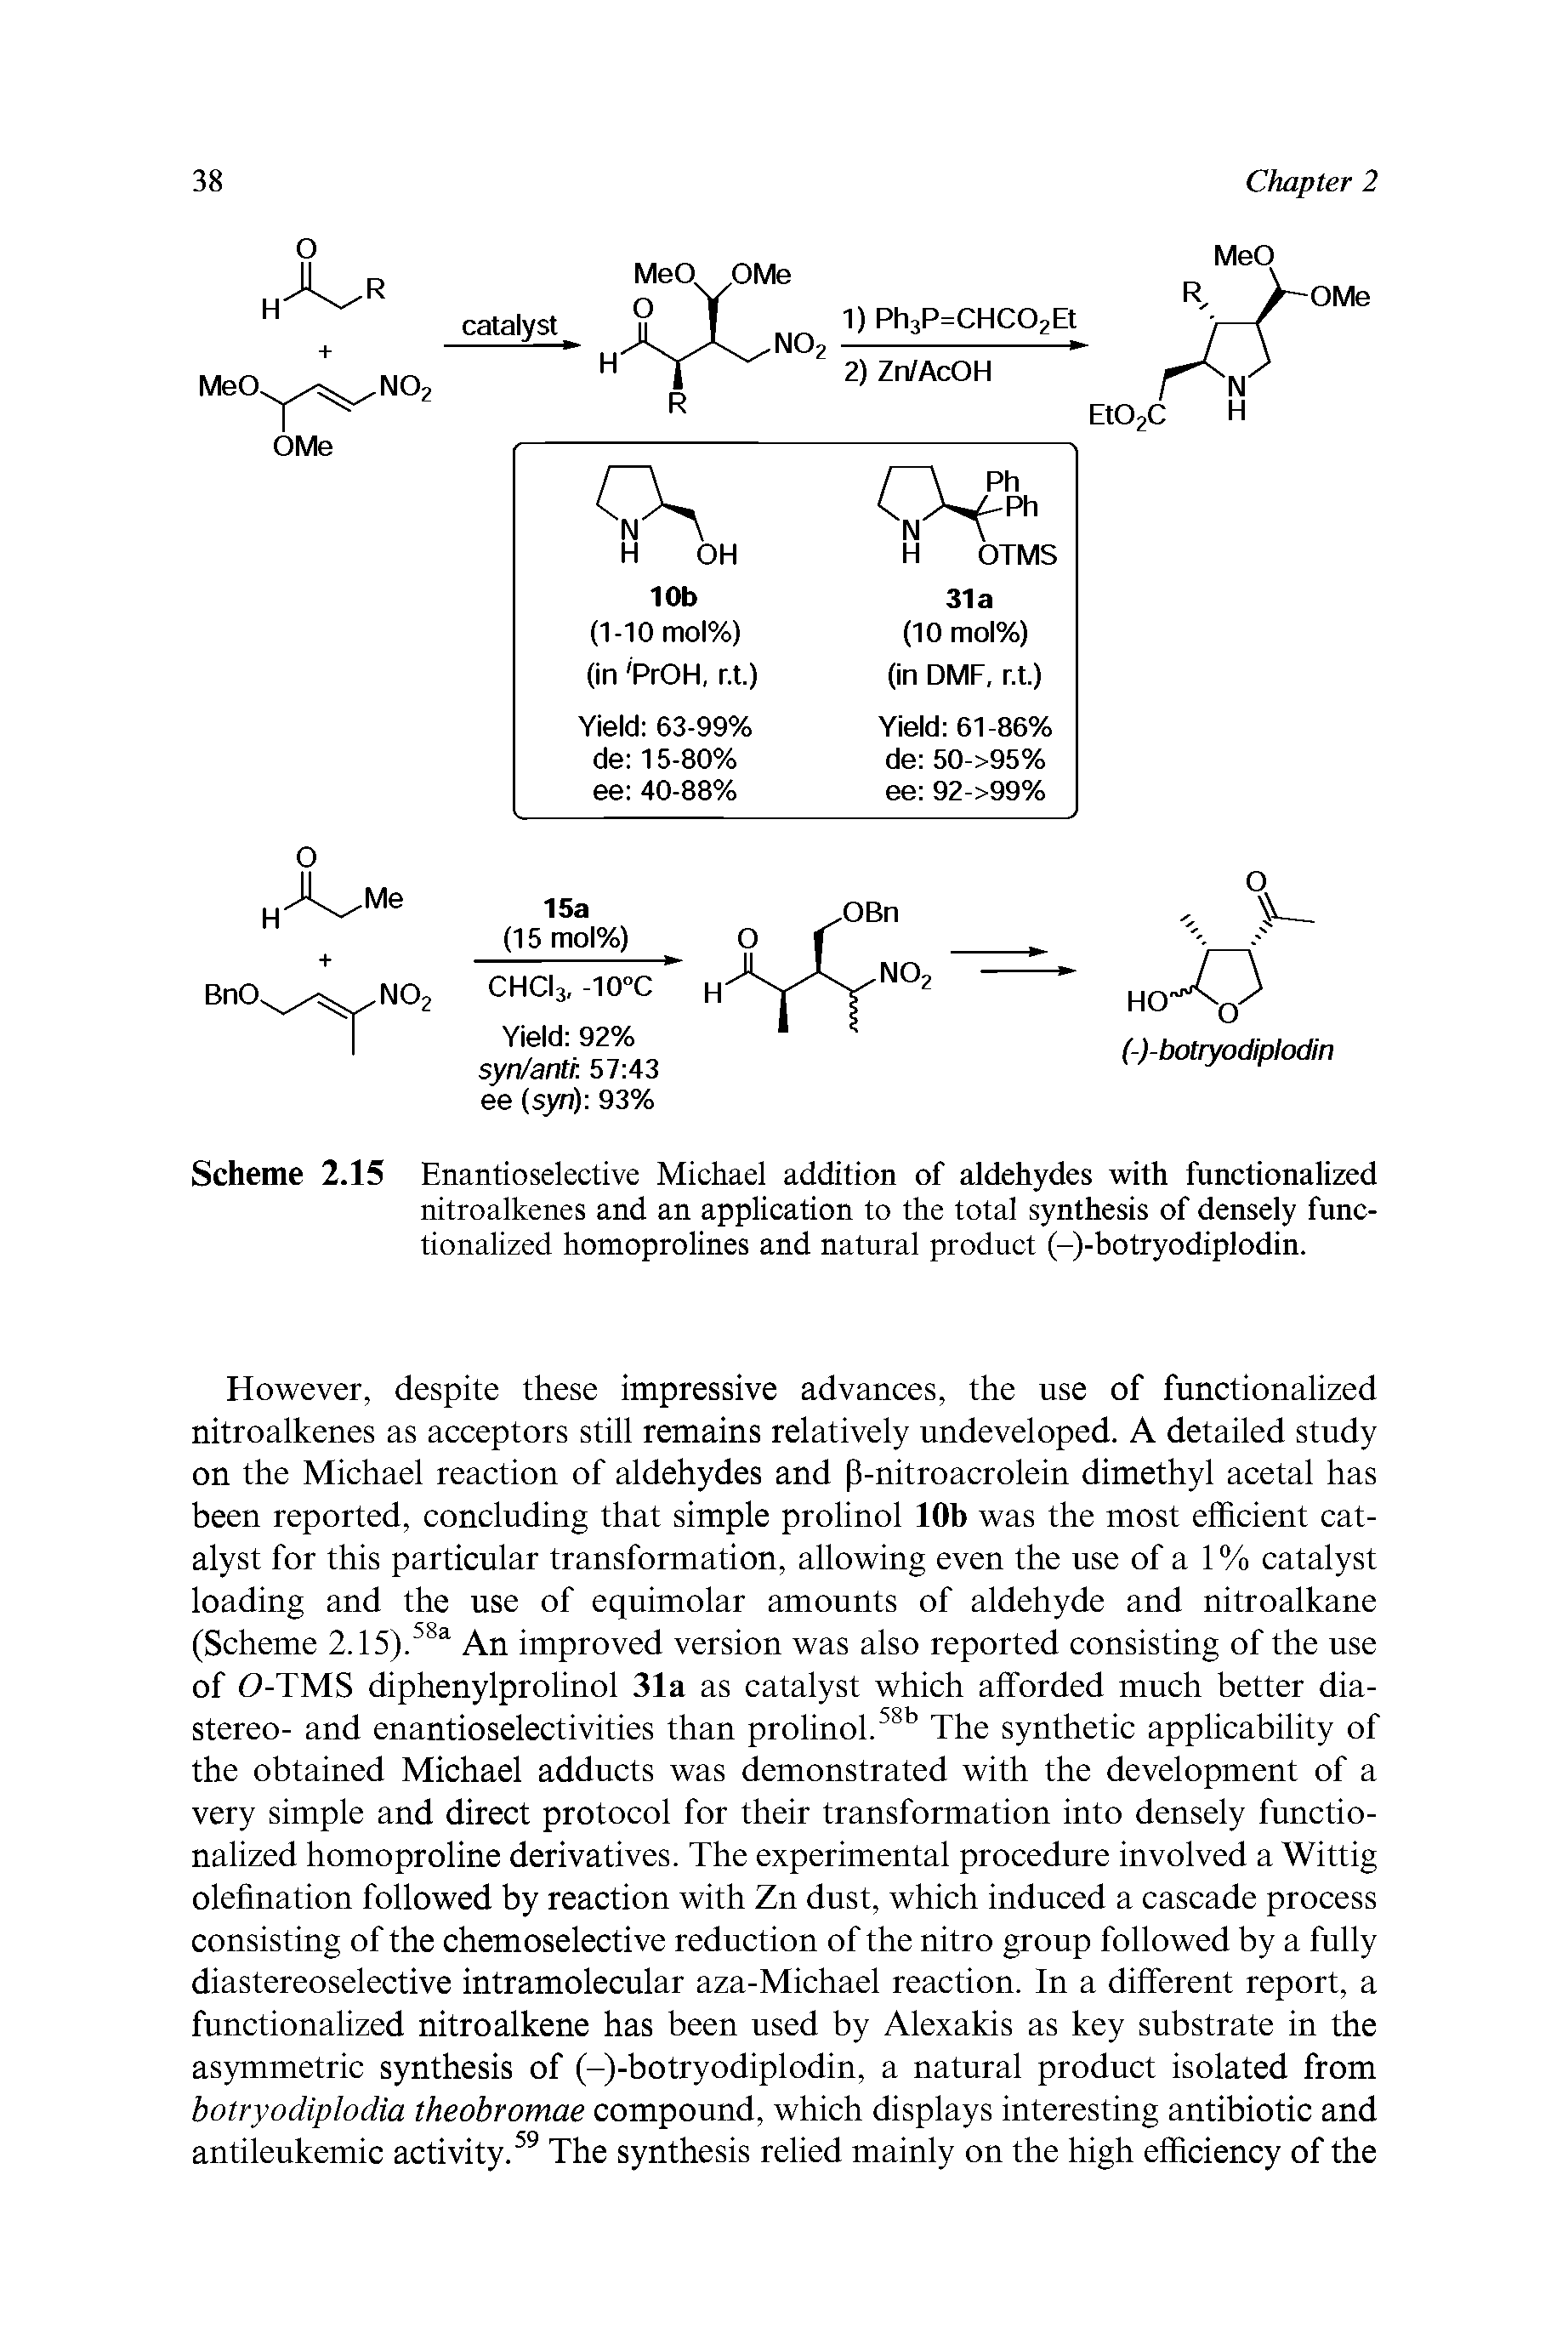 Scheme 2.15 Enantioselective Michael addition of aldehydes with functionalized nitroalkenes and an application to the total synthesis of densely functionalized homoprolines and natural product (-)-botryodipIodin.